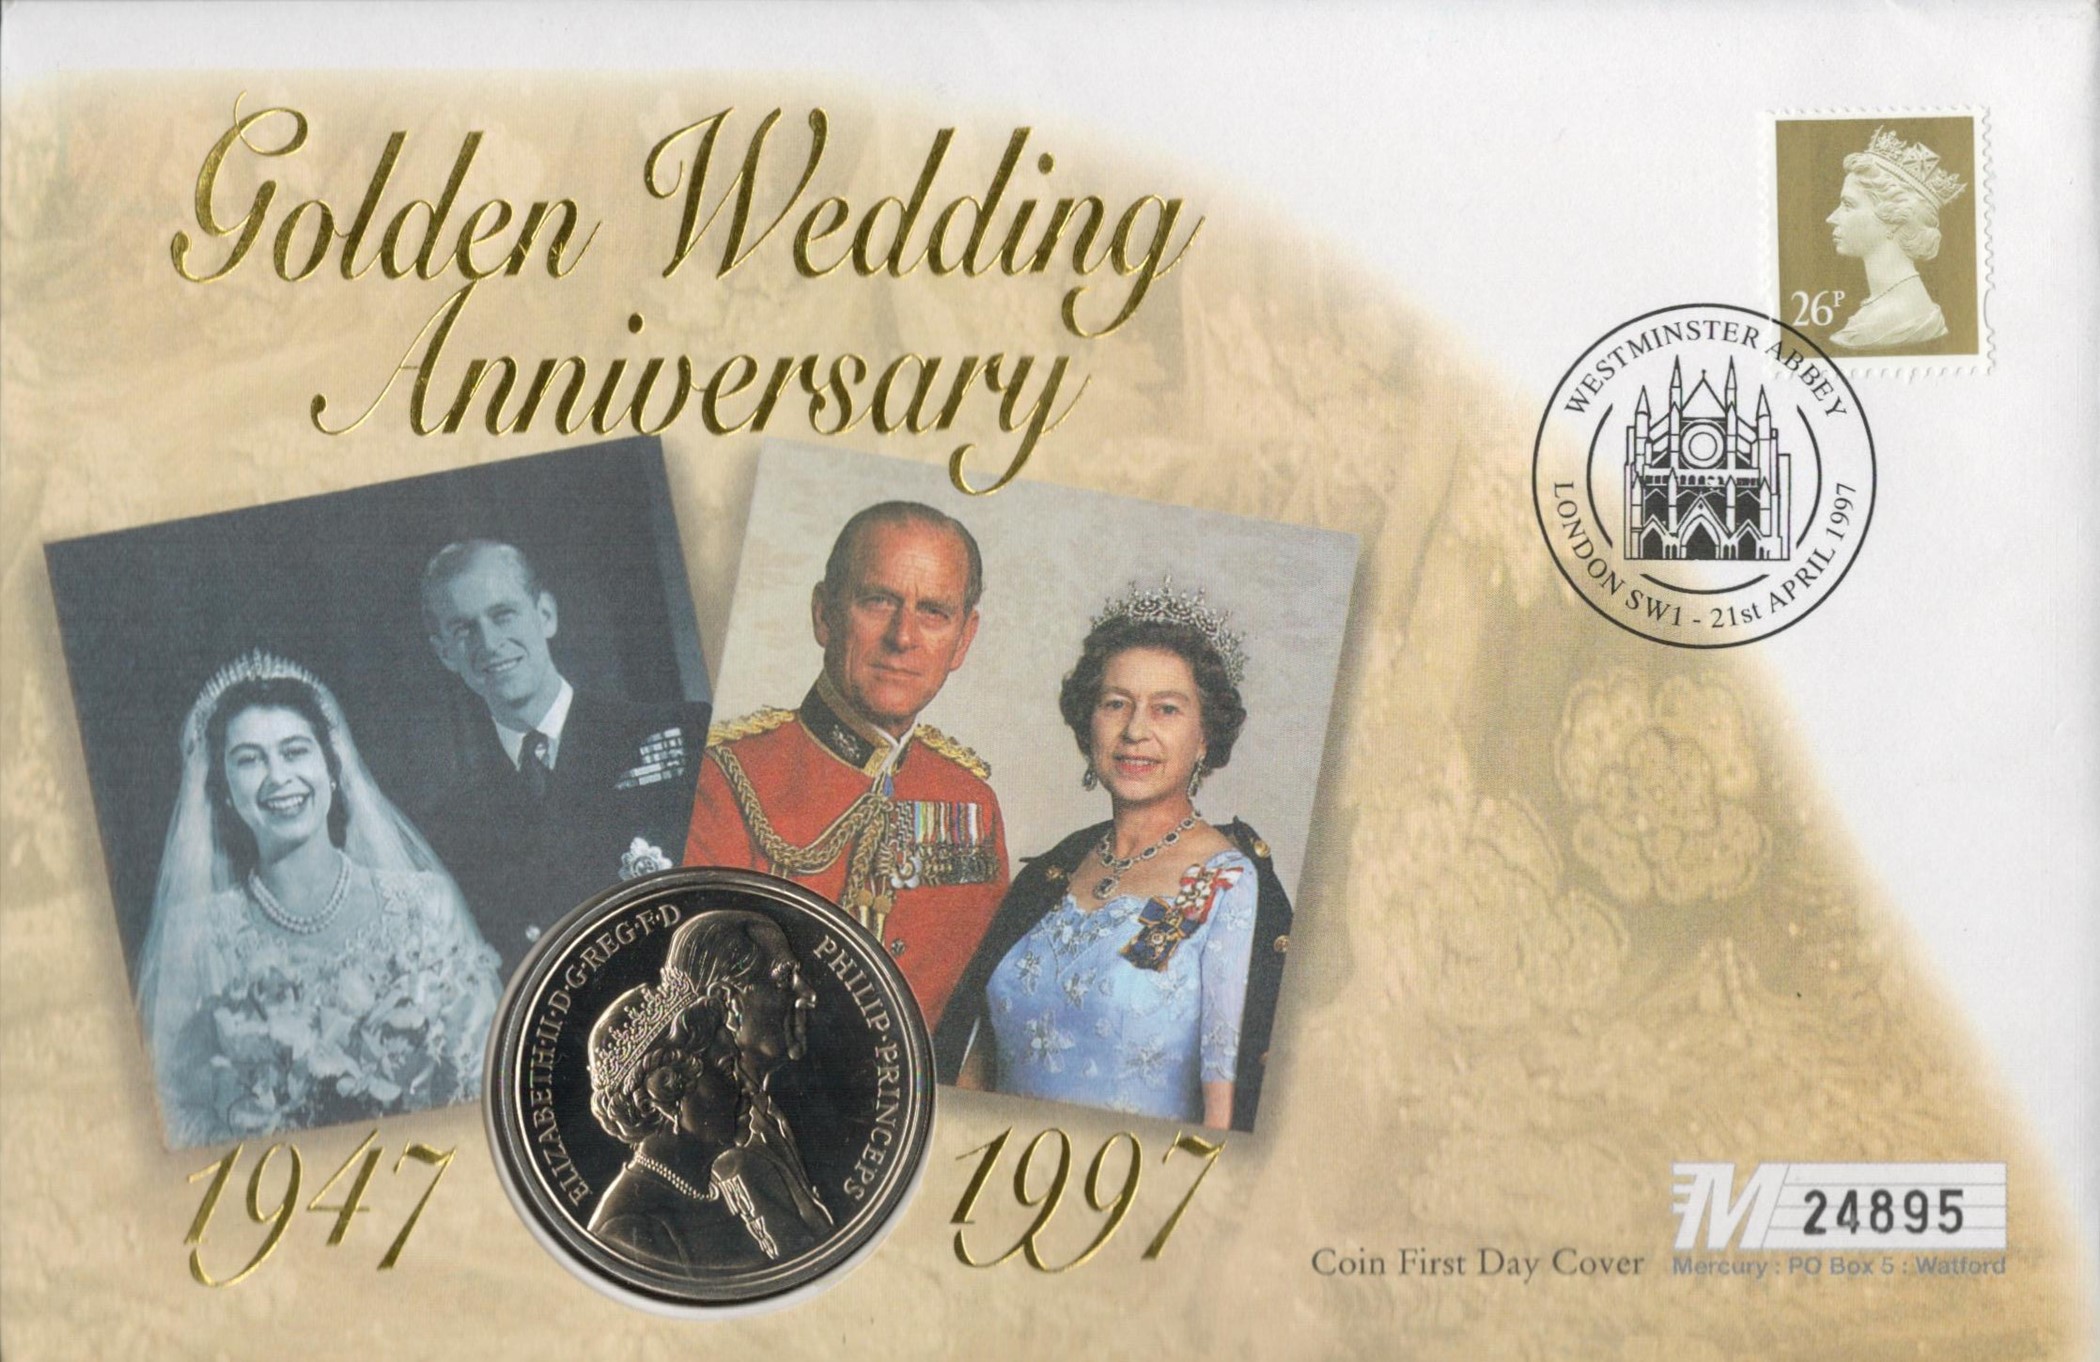 Golden Wedding Anniversary 1947-1997 Coin First Day Cover showing 20th November £5 coin. Westminster